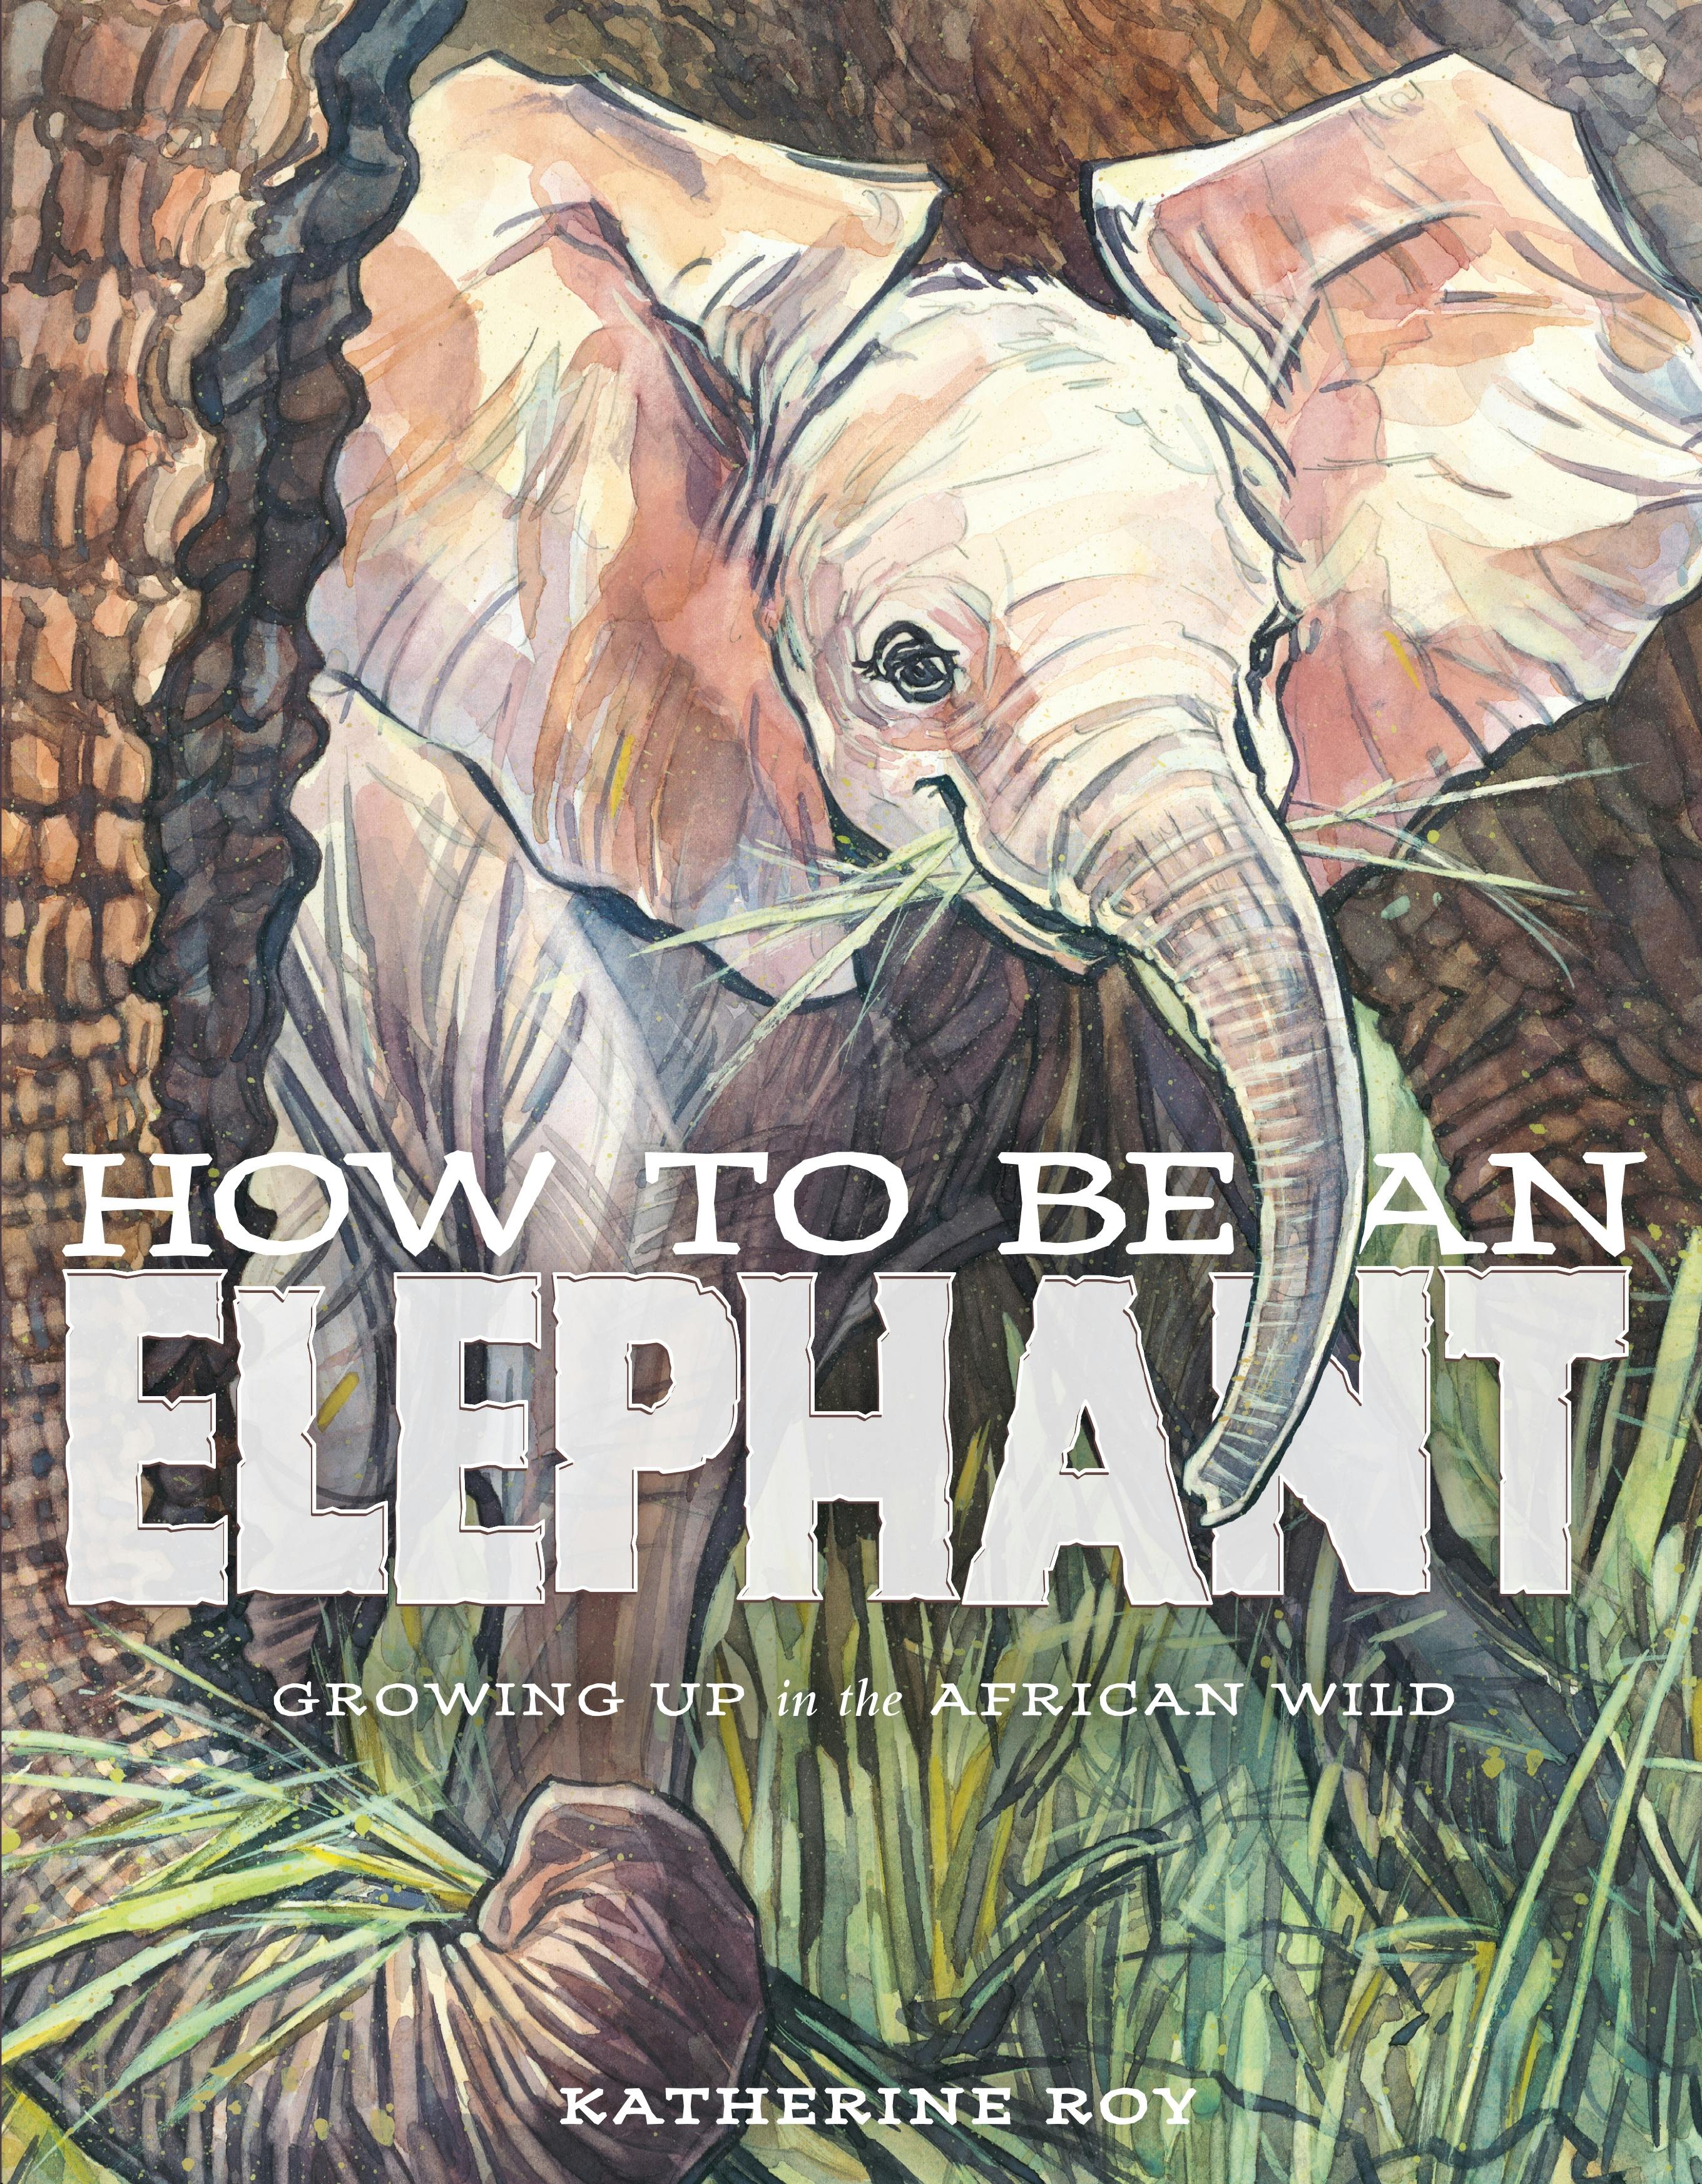 The Essential Guide to Wordless Picture Books! - Happily Ever Elephants